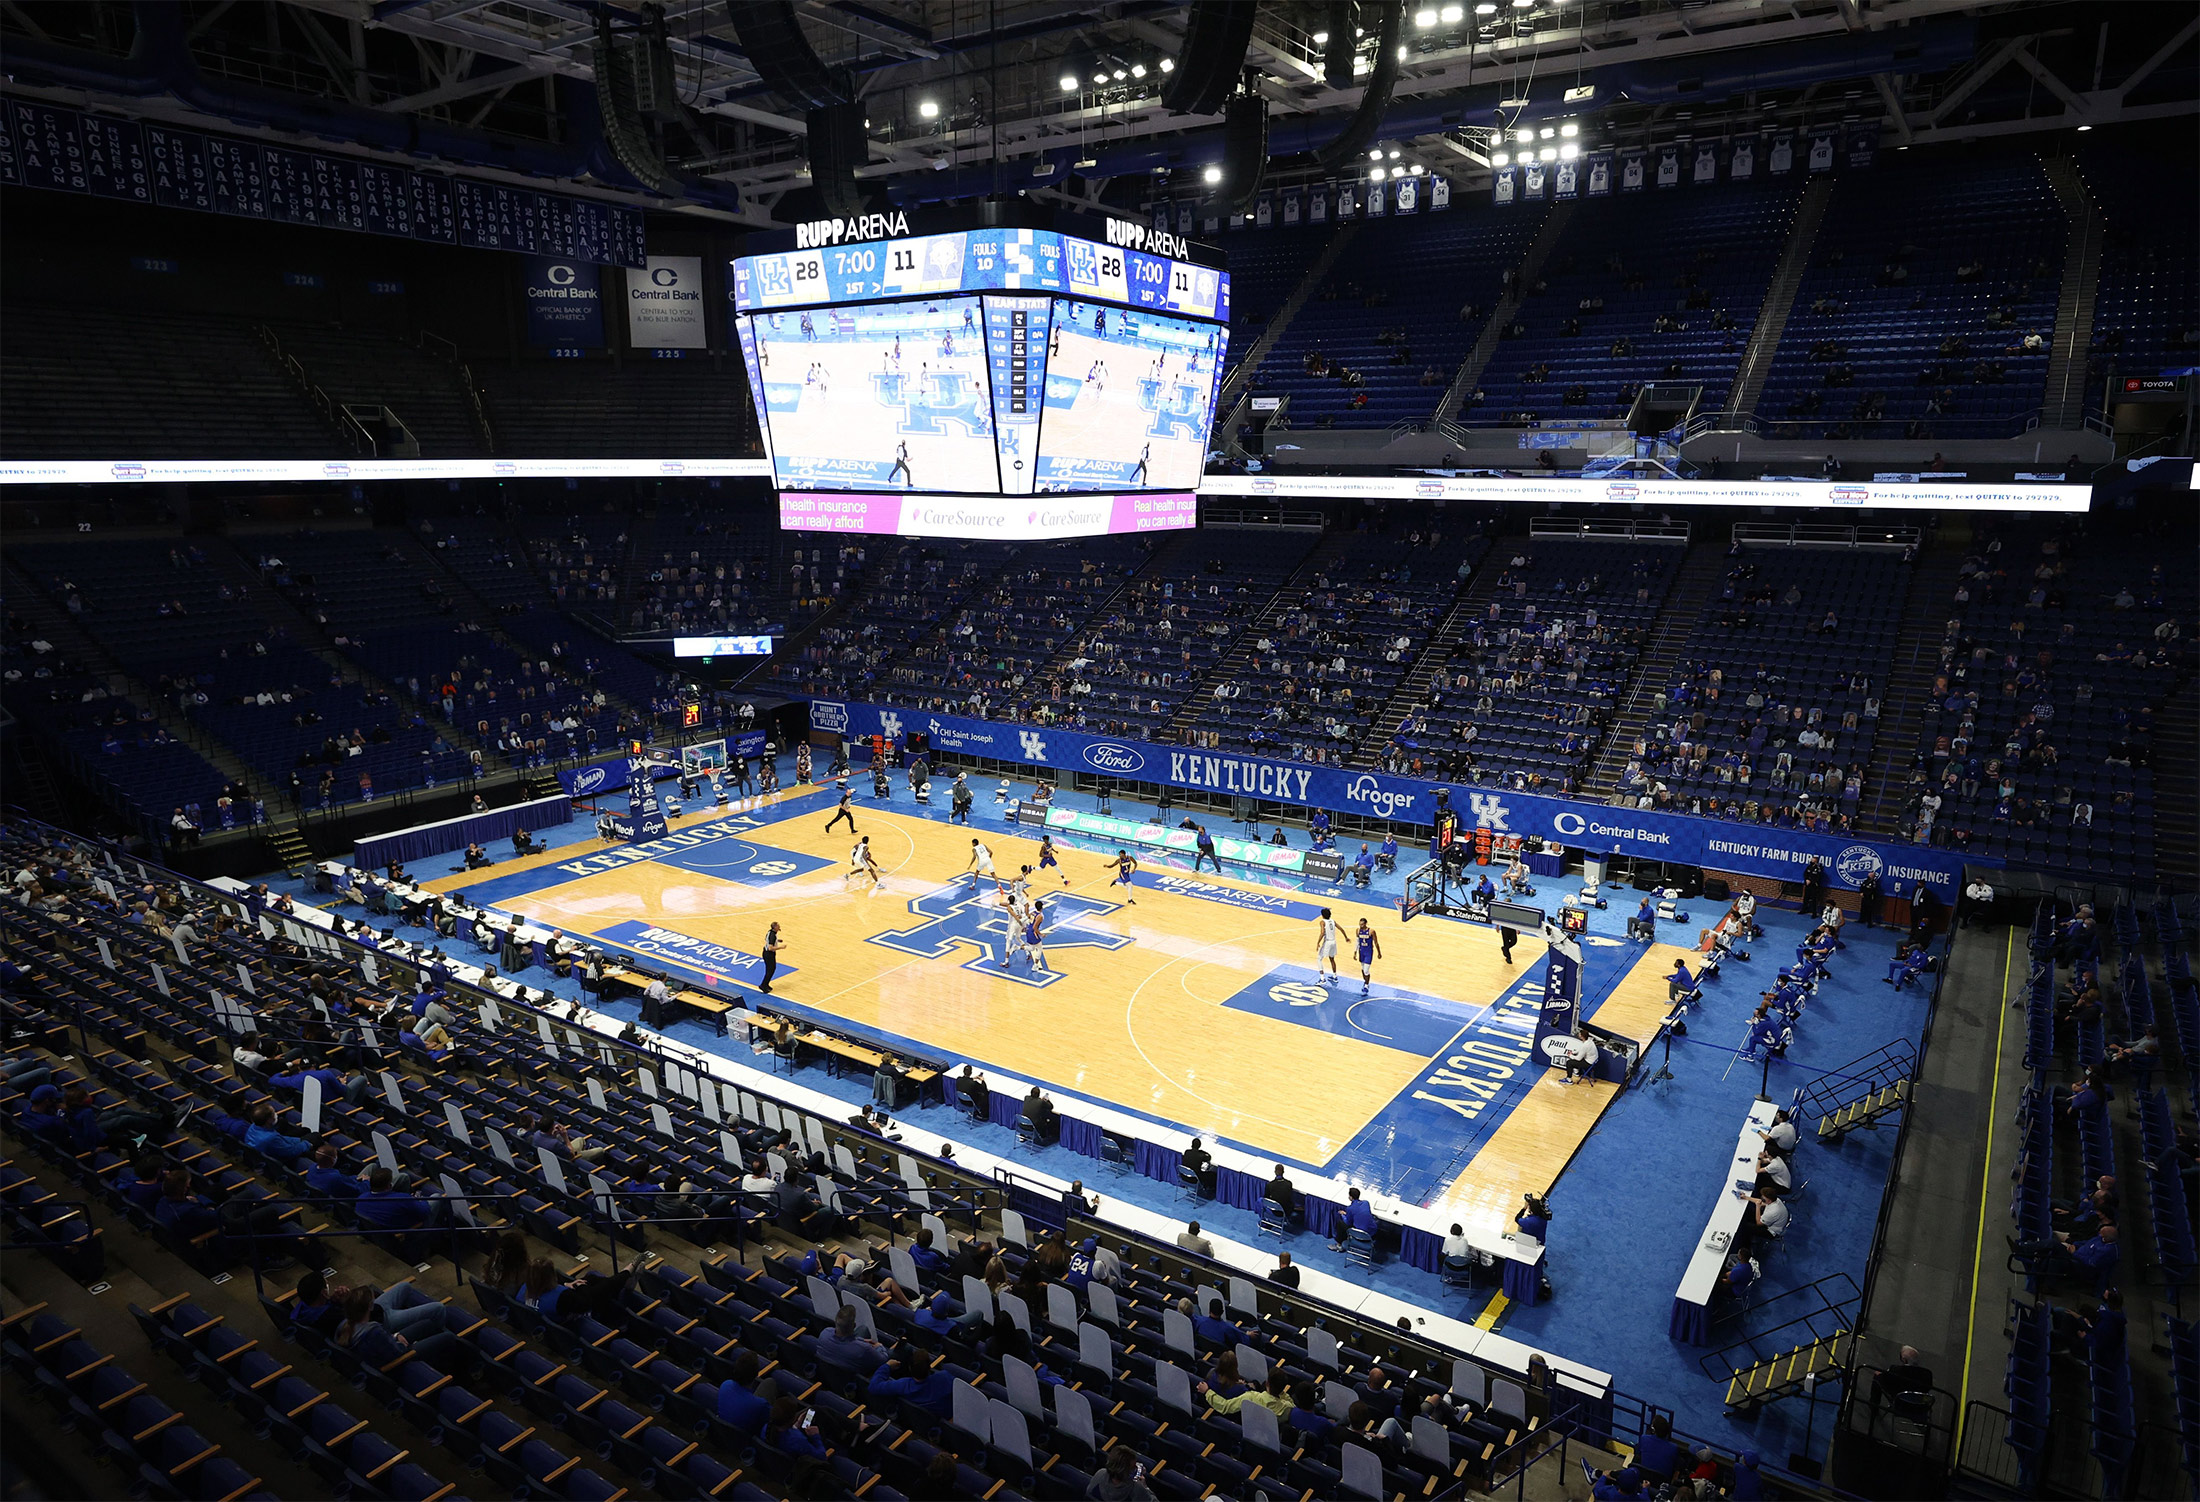 Rupp Arena unveils newly completed upgrades - Sports Venue Business (SVB)